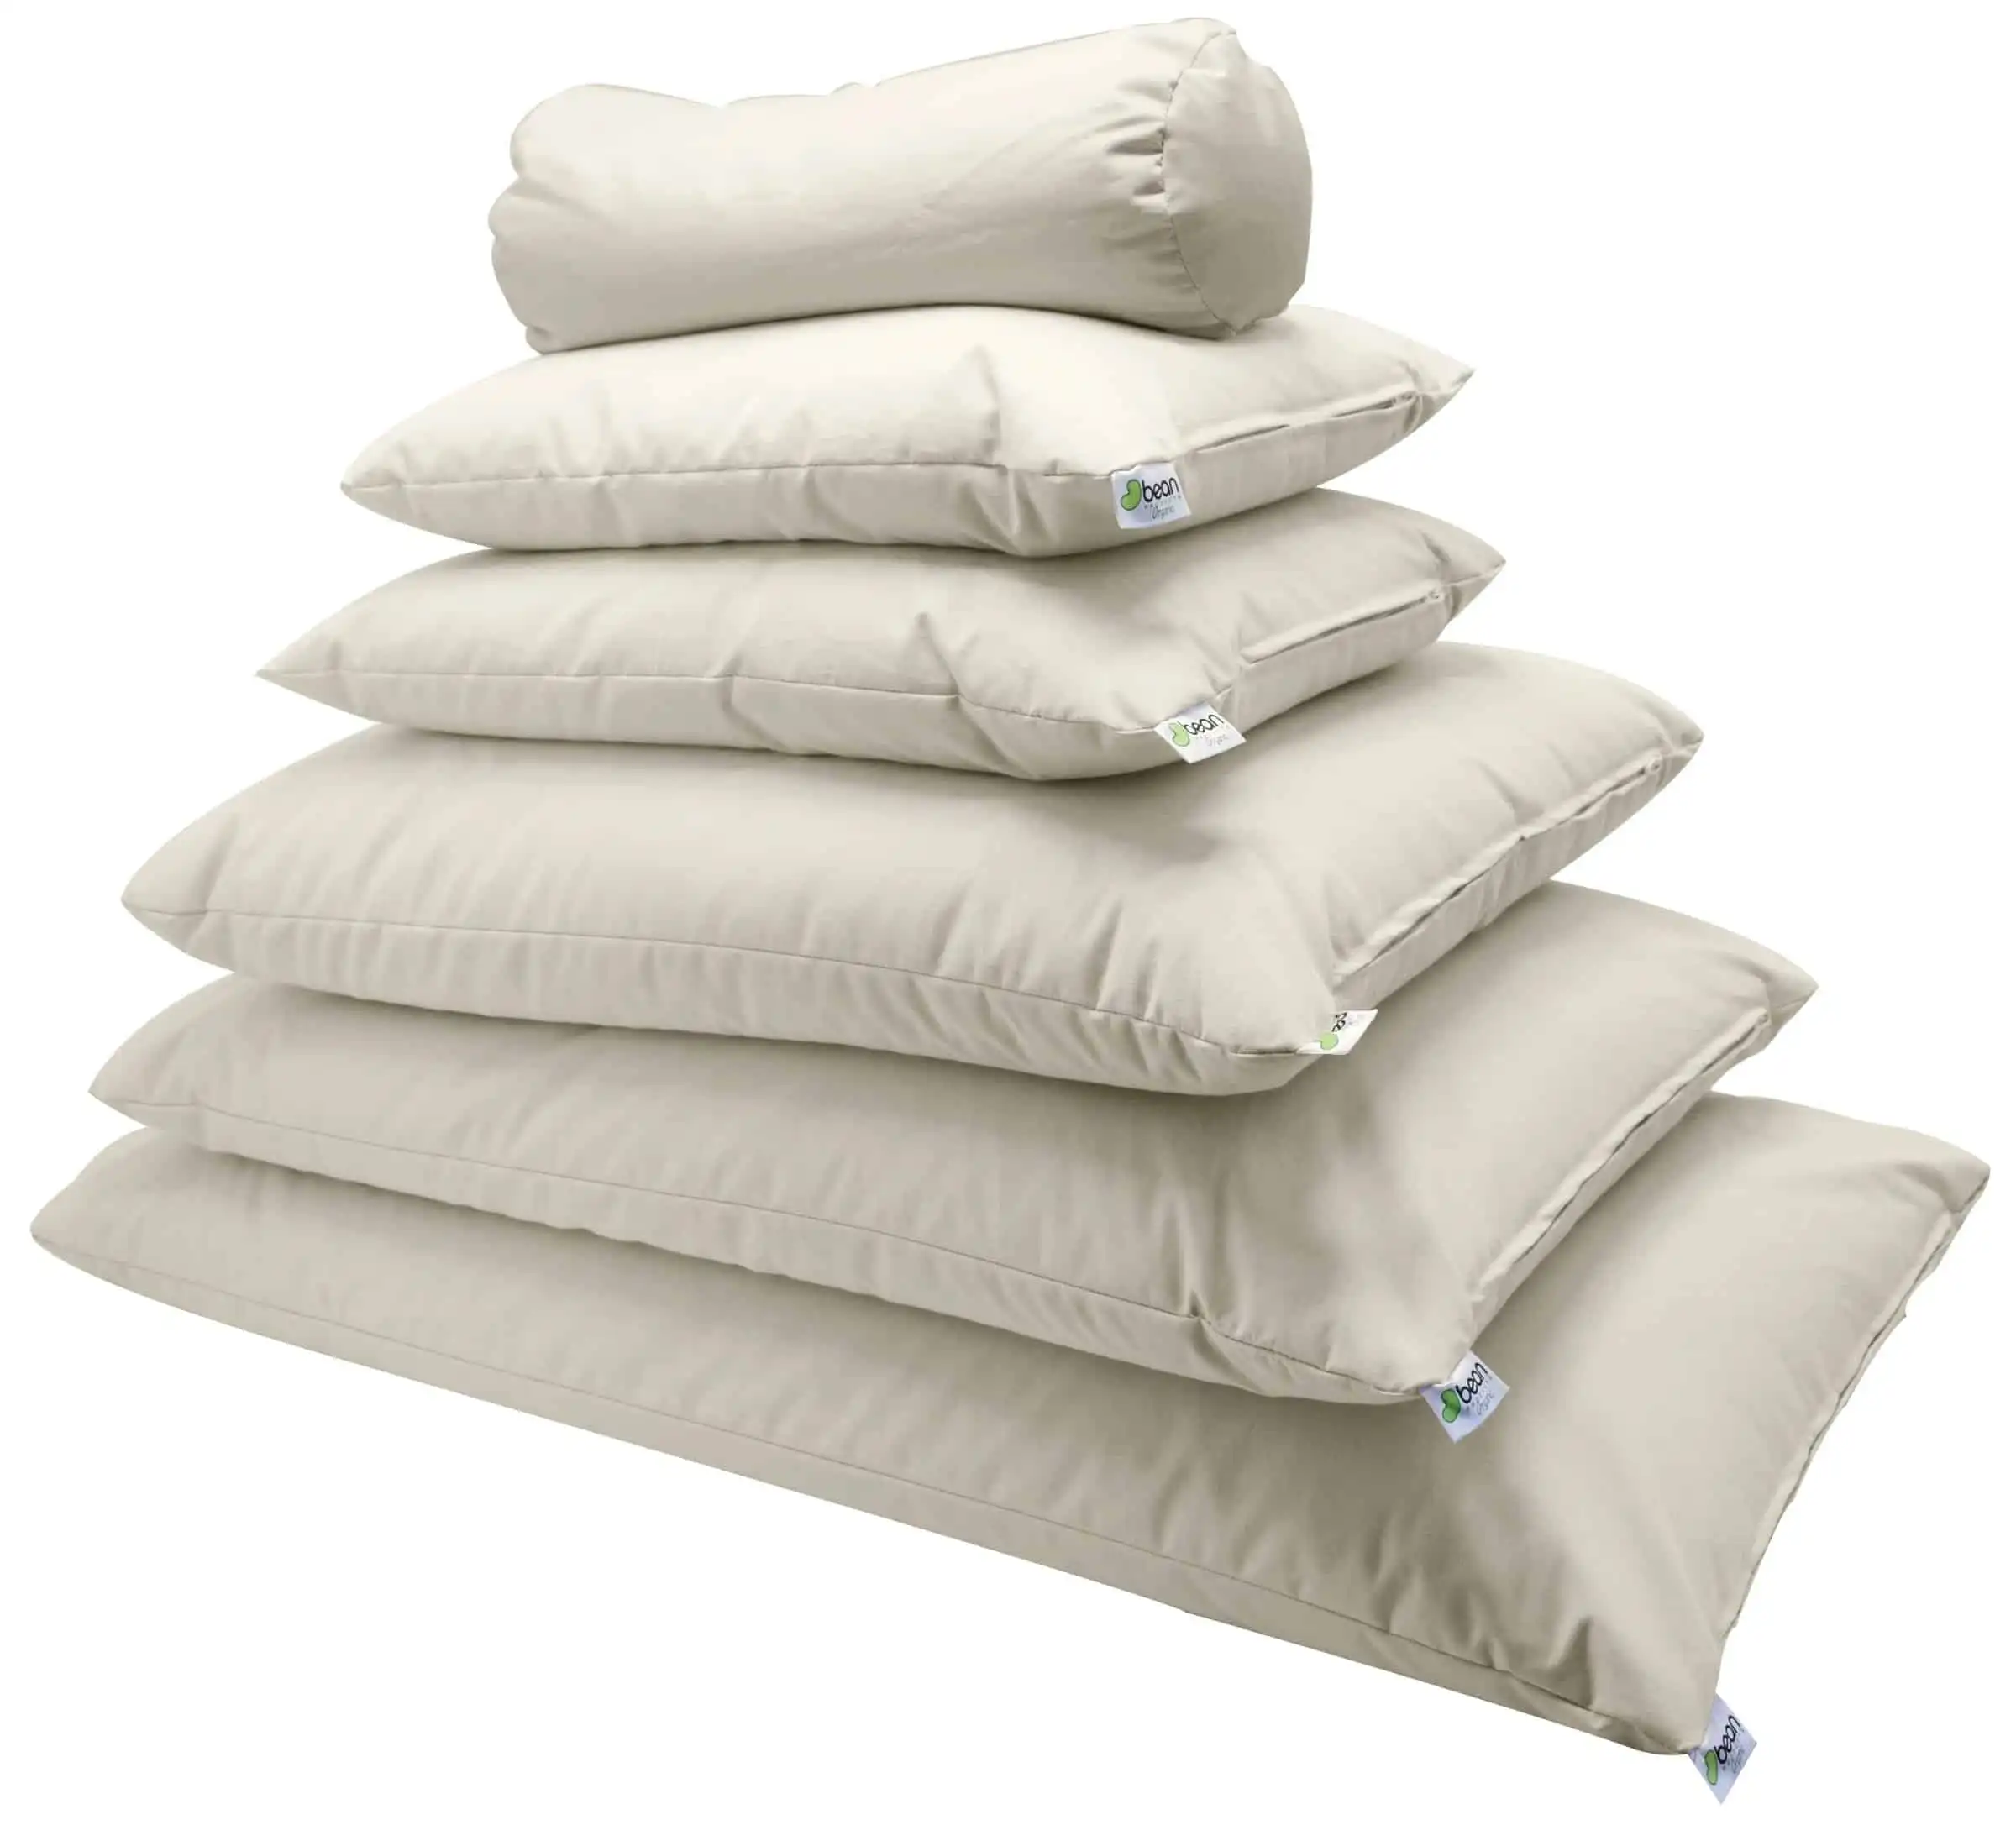 Bean Products Chemical-Free Toddler Pillows